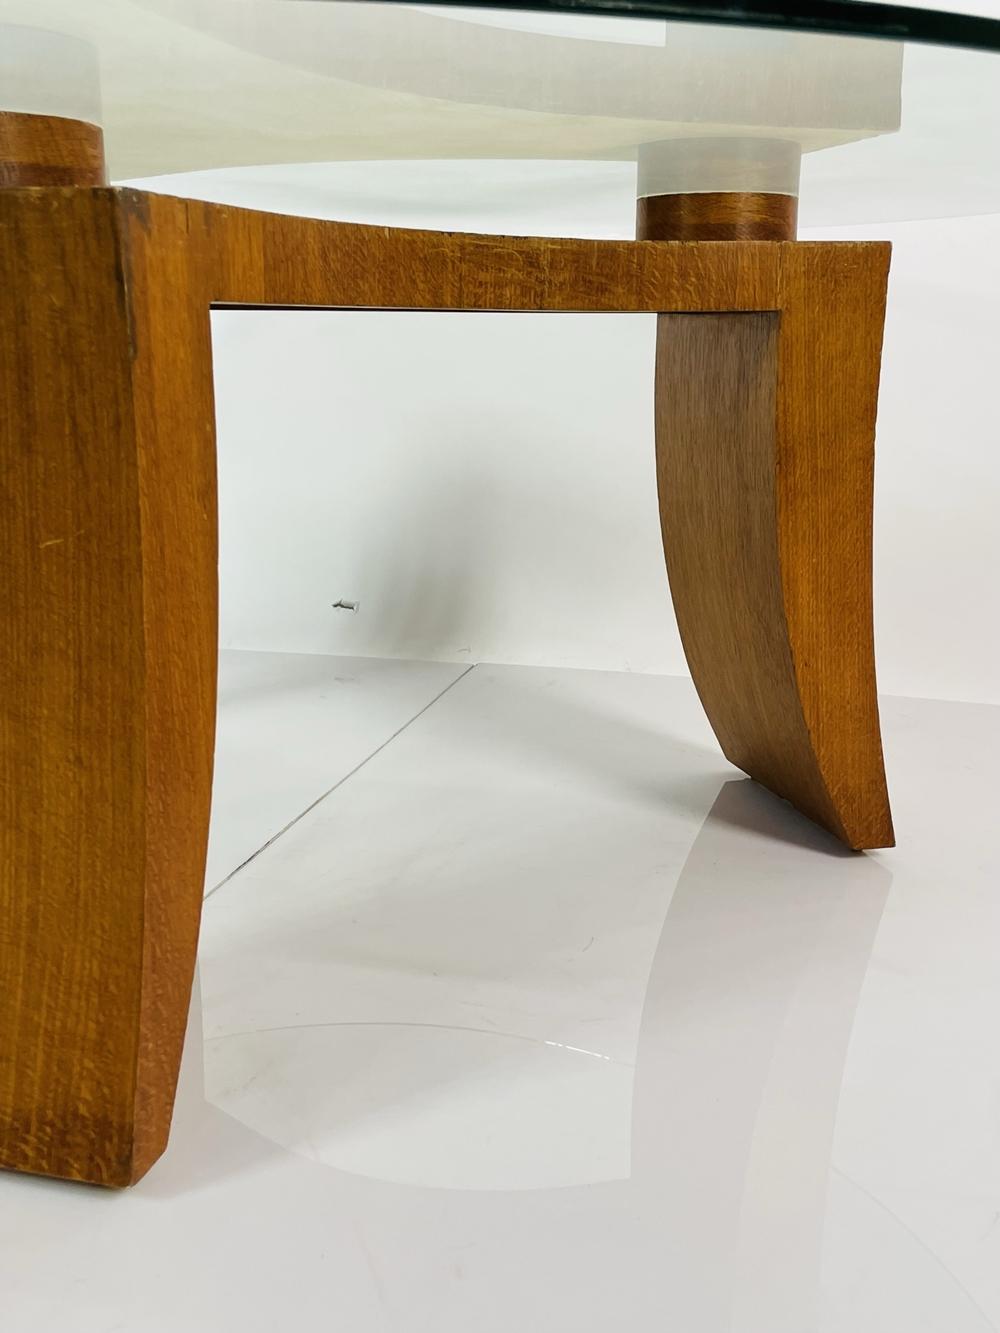 Mid-20th Century Wood & Glass Coffee Table in the style of Vladimir Kagan